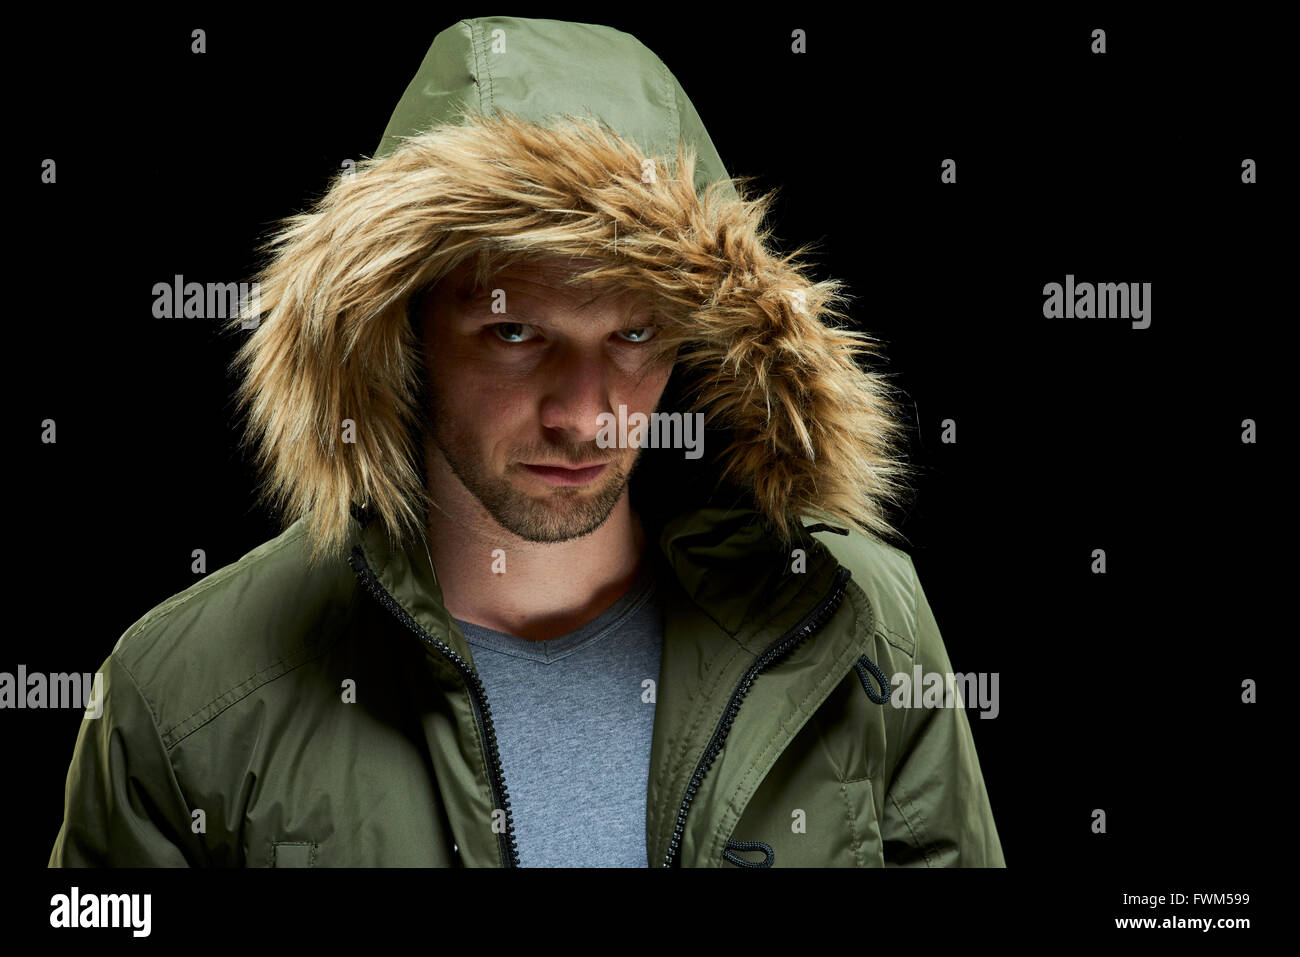 Low key studio portrait of suspicious young adult caucasian model wearing winter coat with hood on. Stock Photo